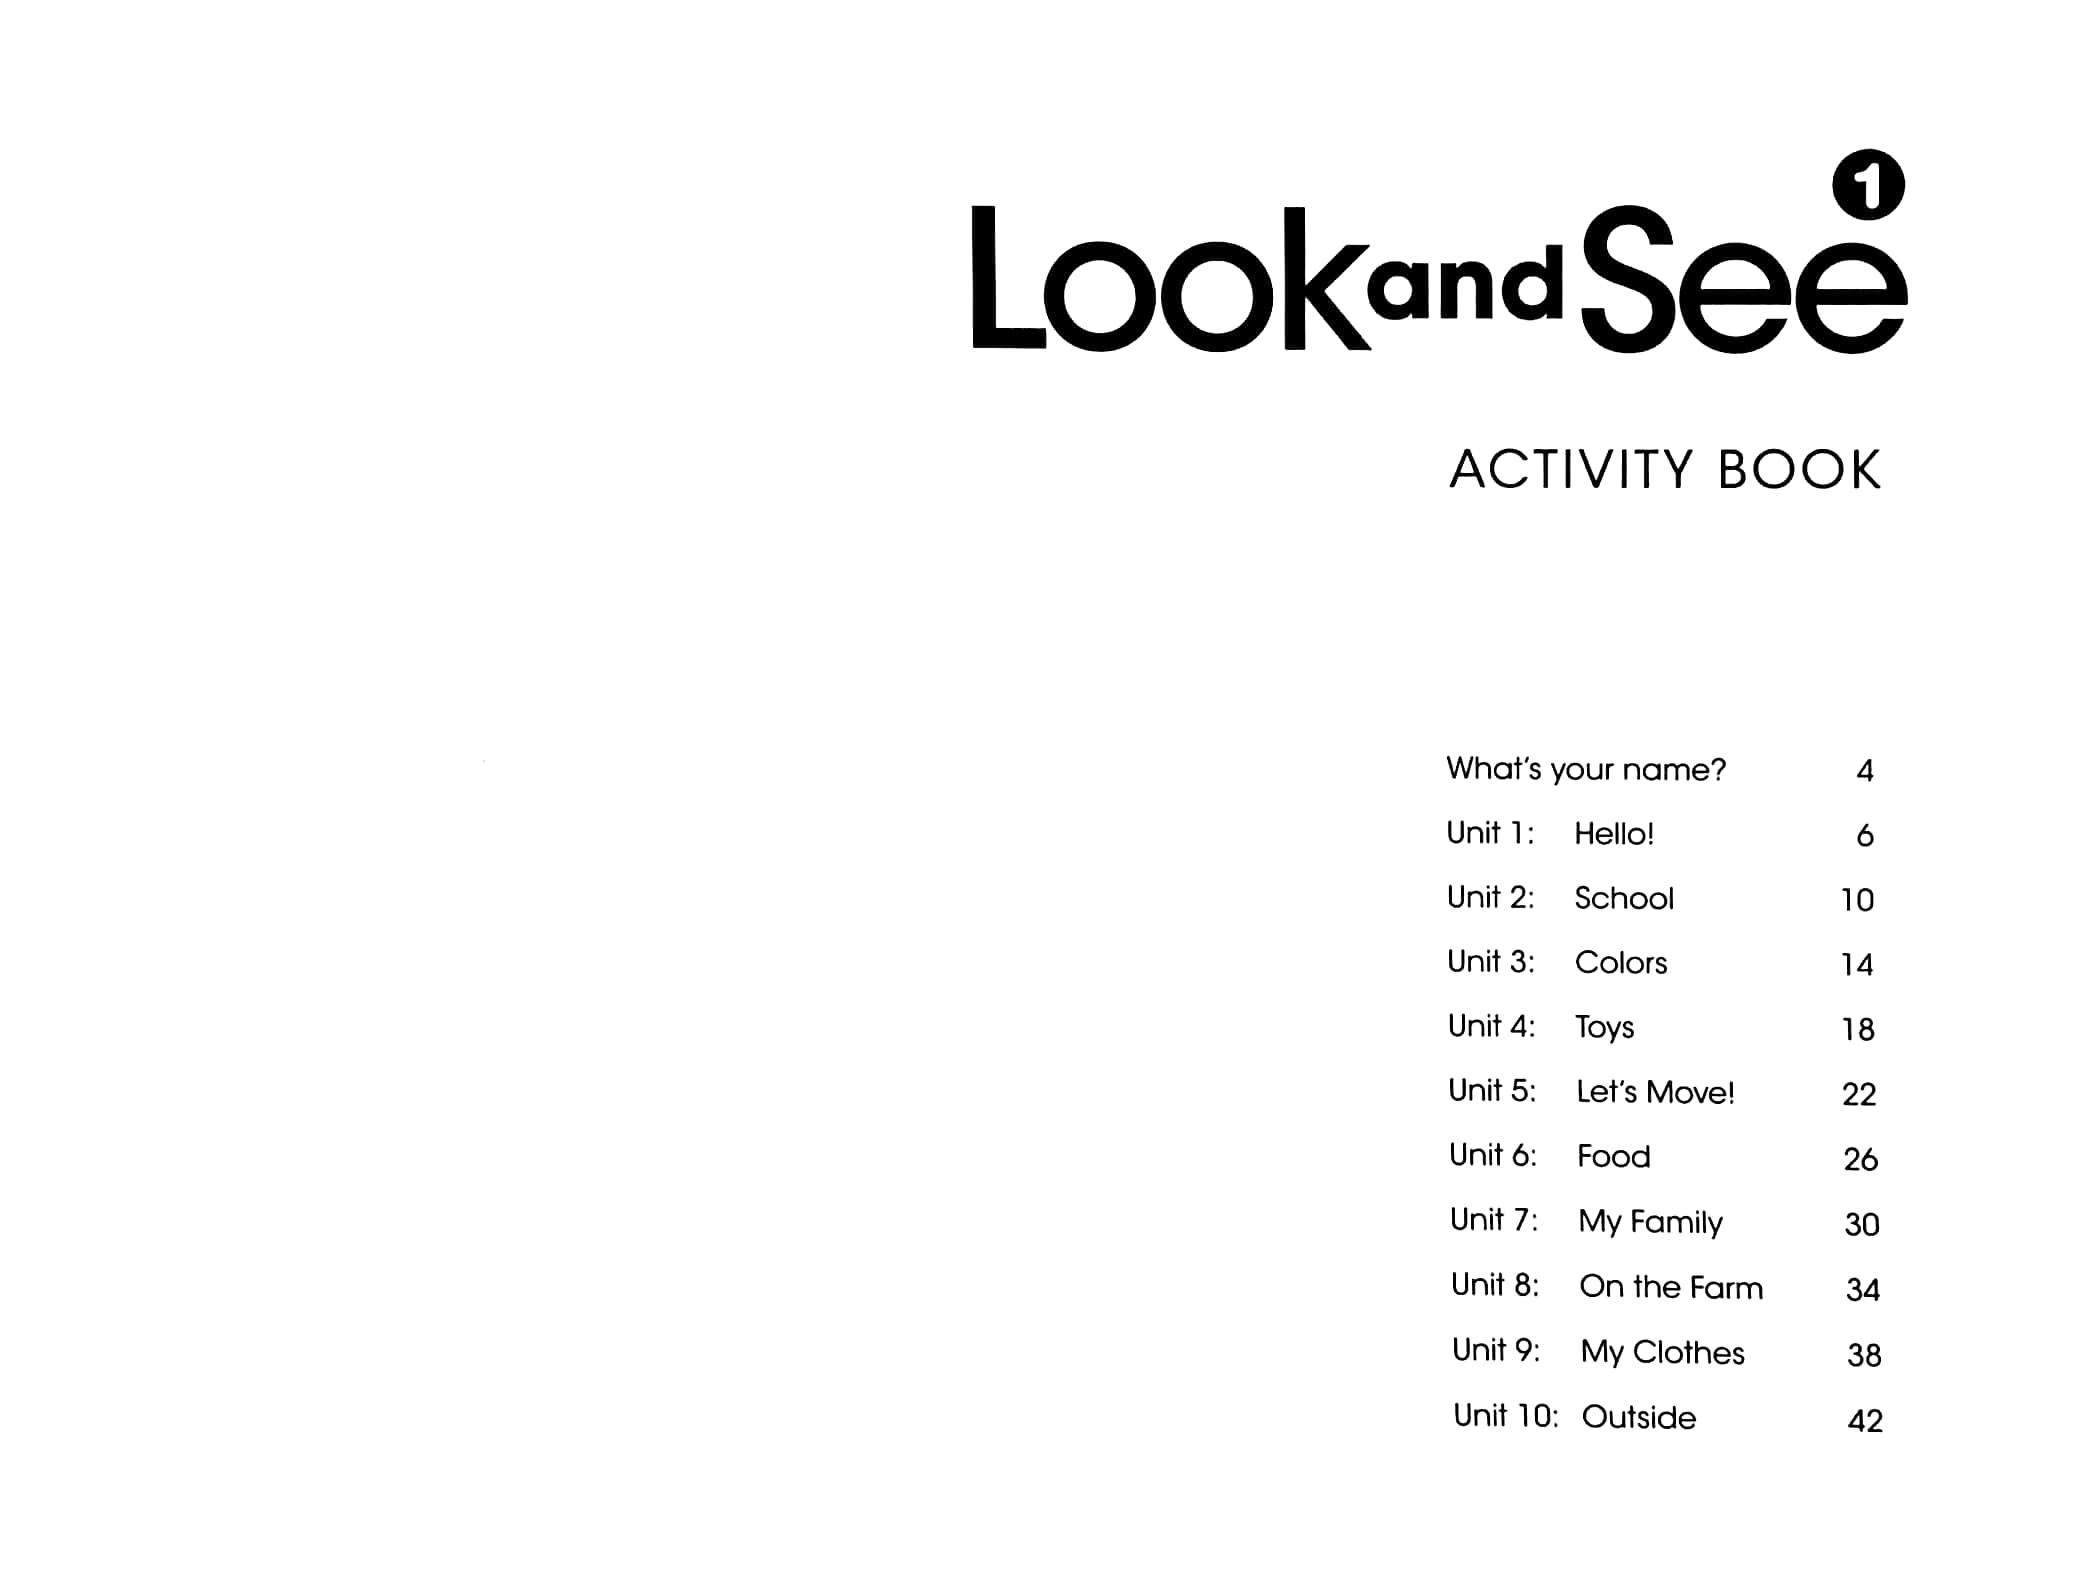 Look And See AME 1: Activity Book